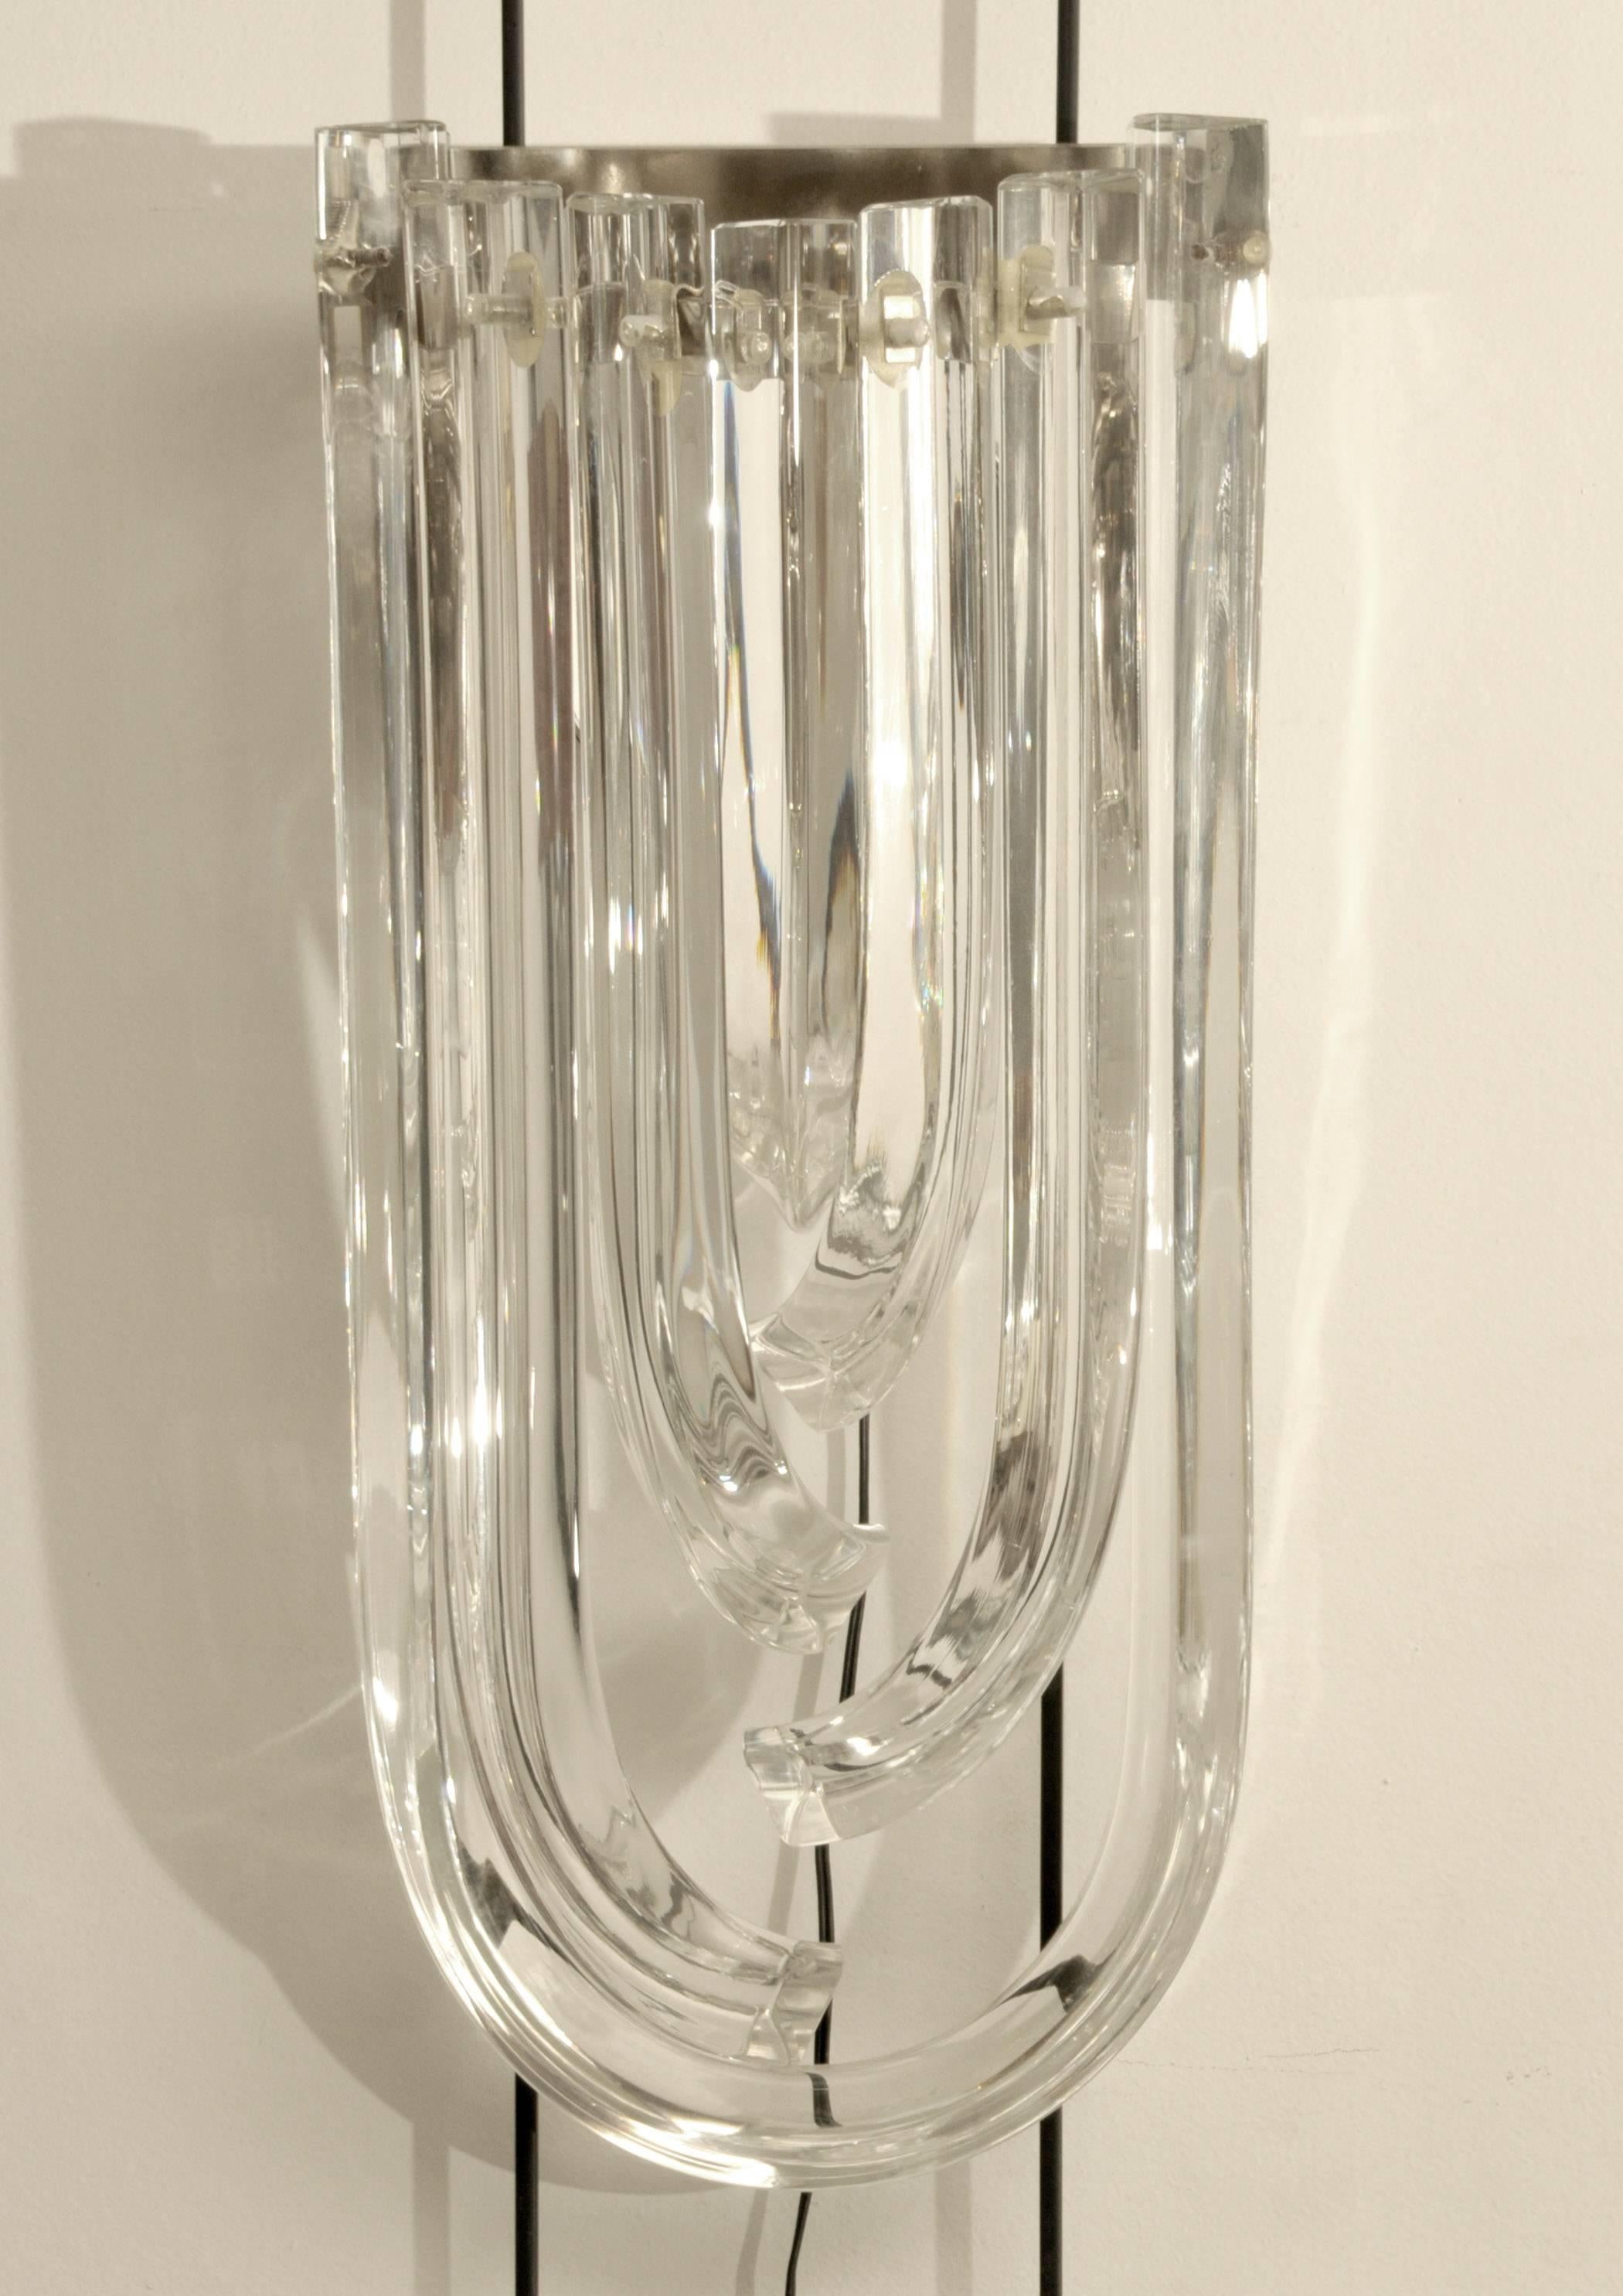 Pair of Murano curved crystal sconces
Fixture in plated chrome.
Each sconce has one bulb.
Pair of sconces from a set of 8.